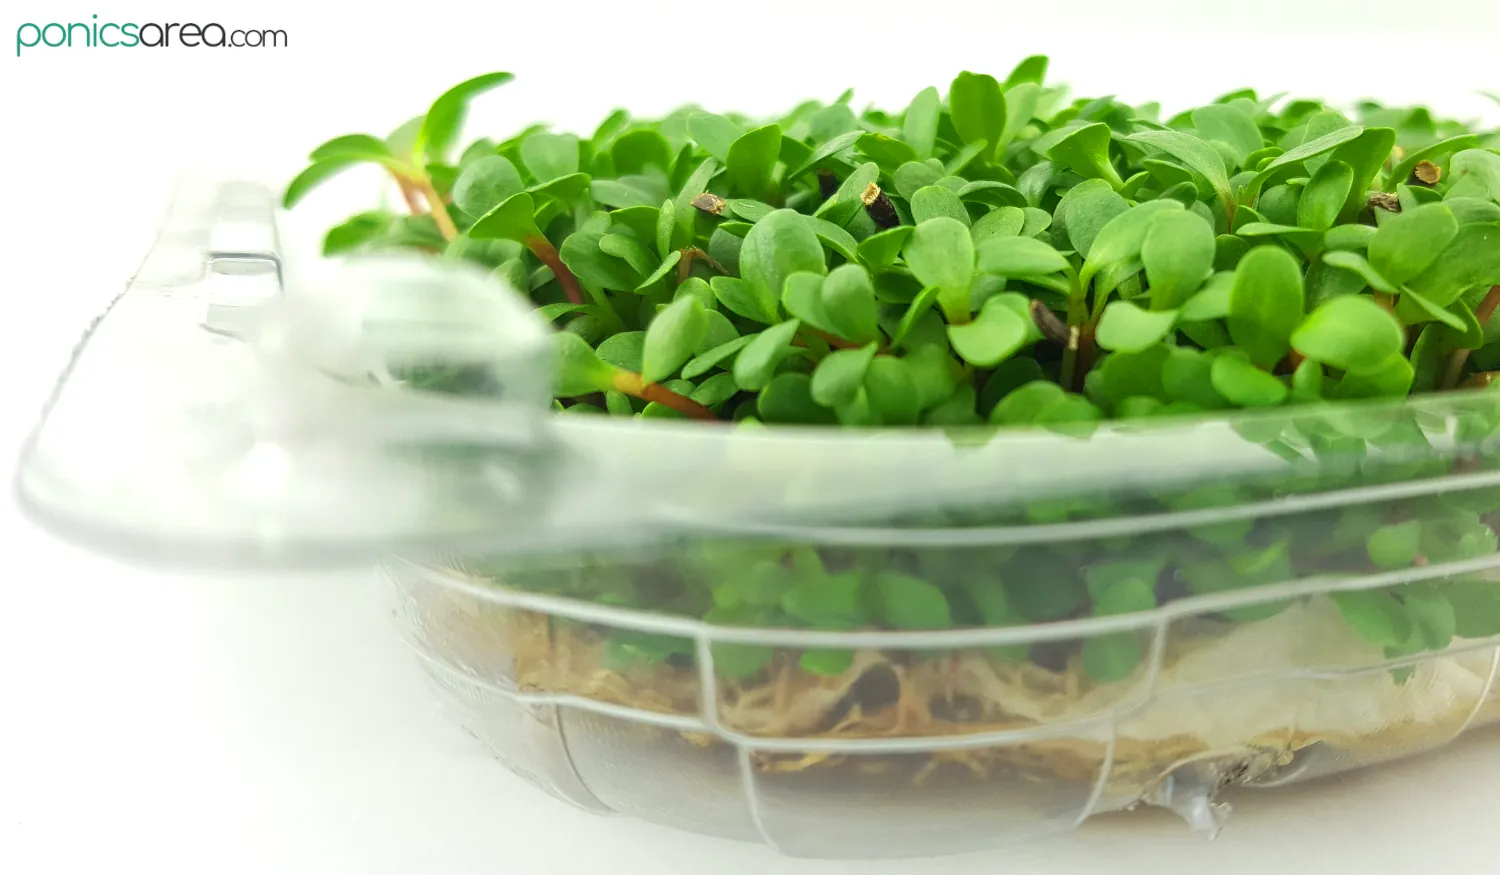 microgreen trays for growing on paper towel